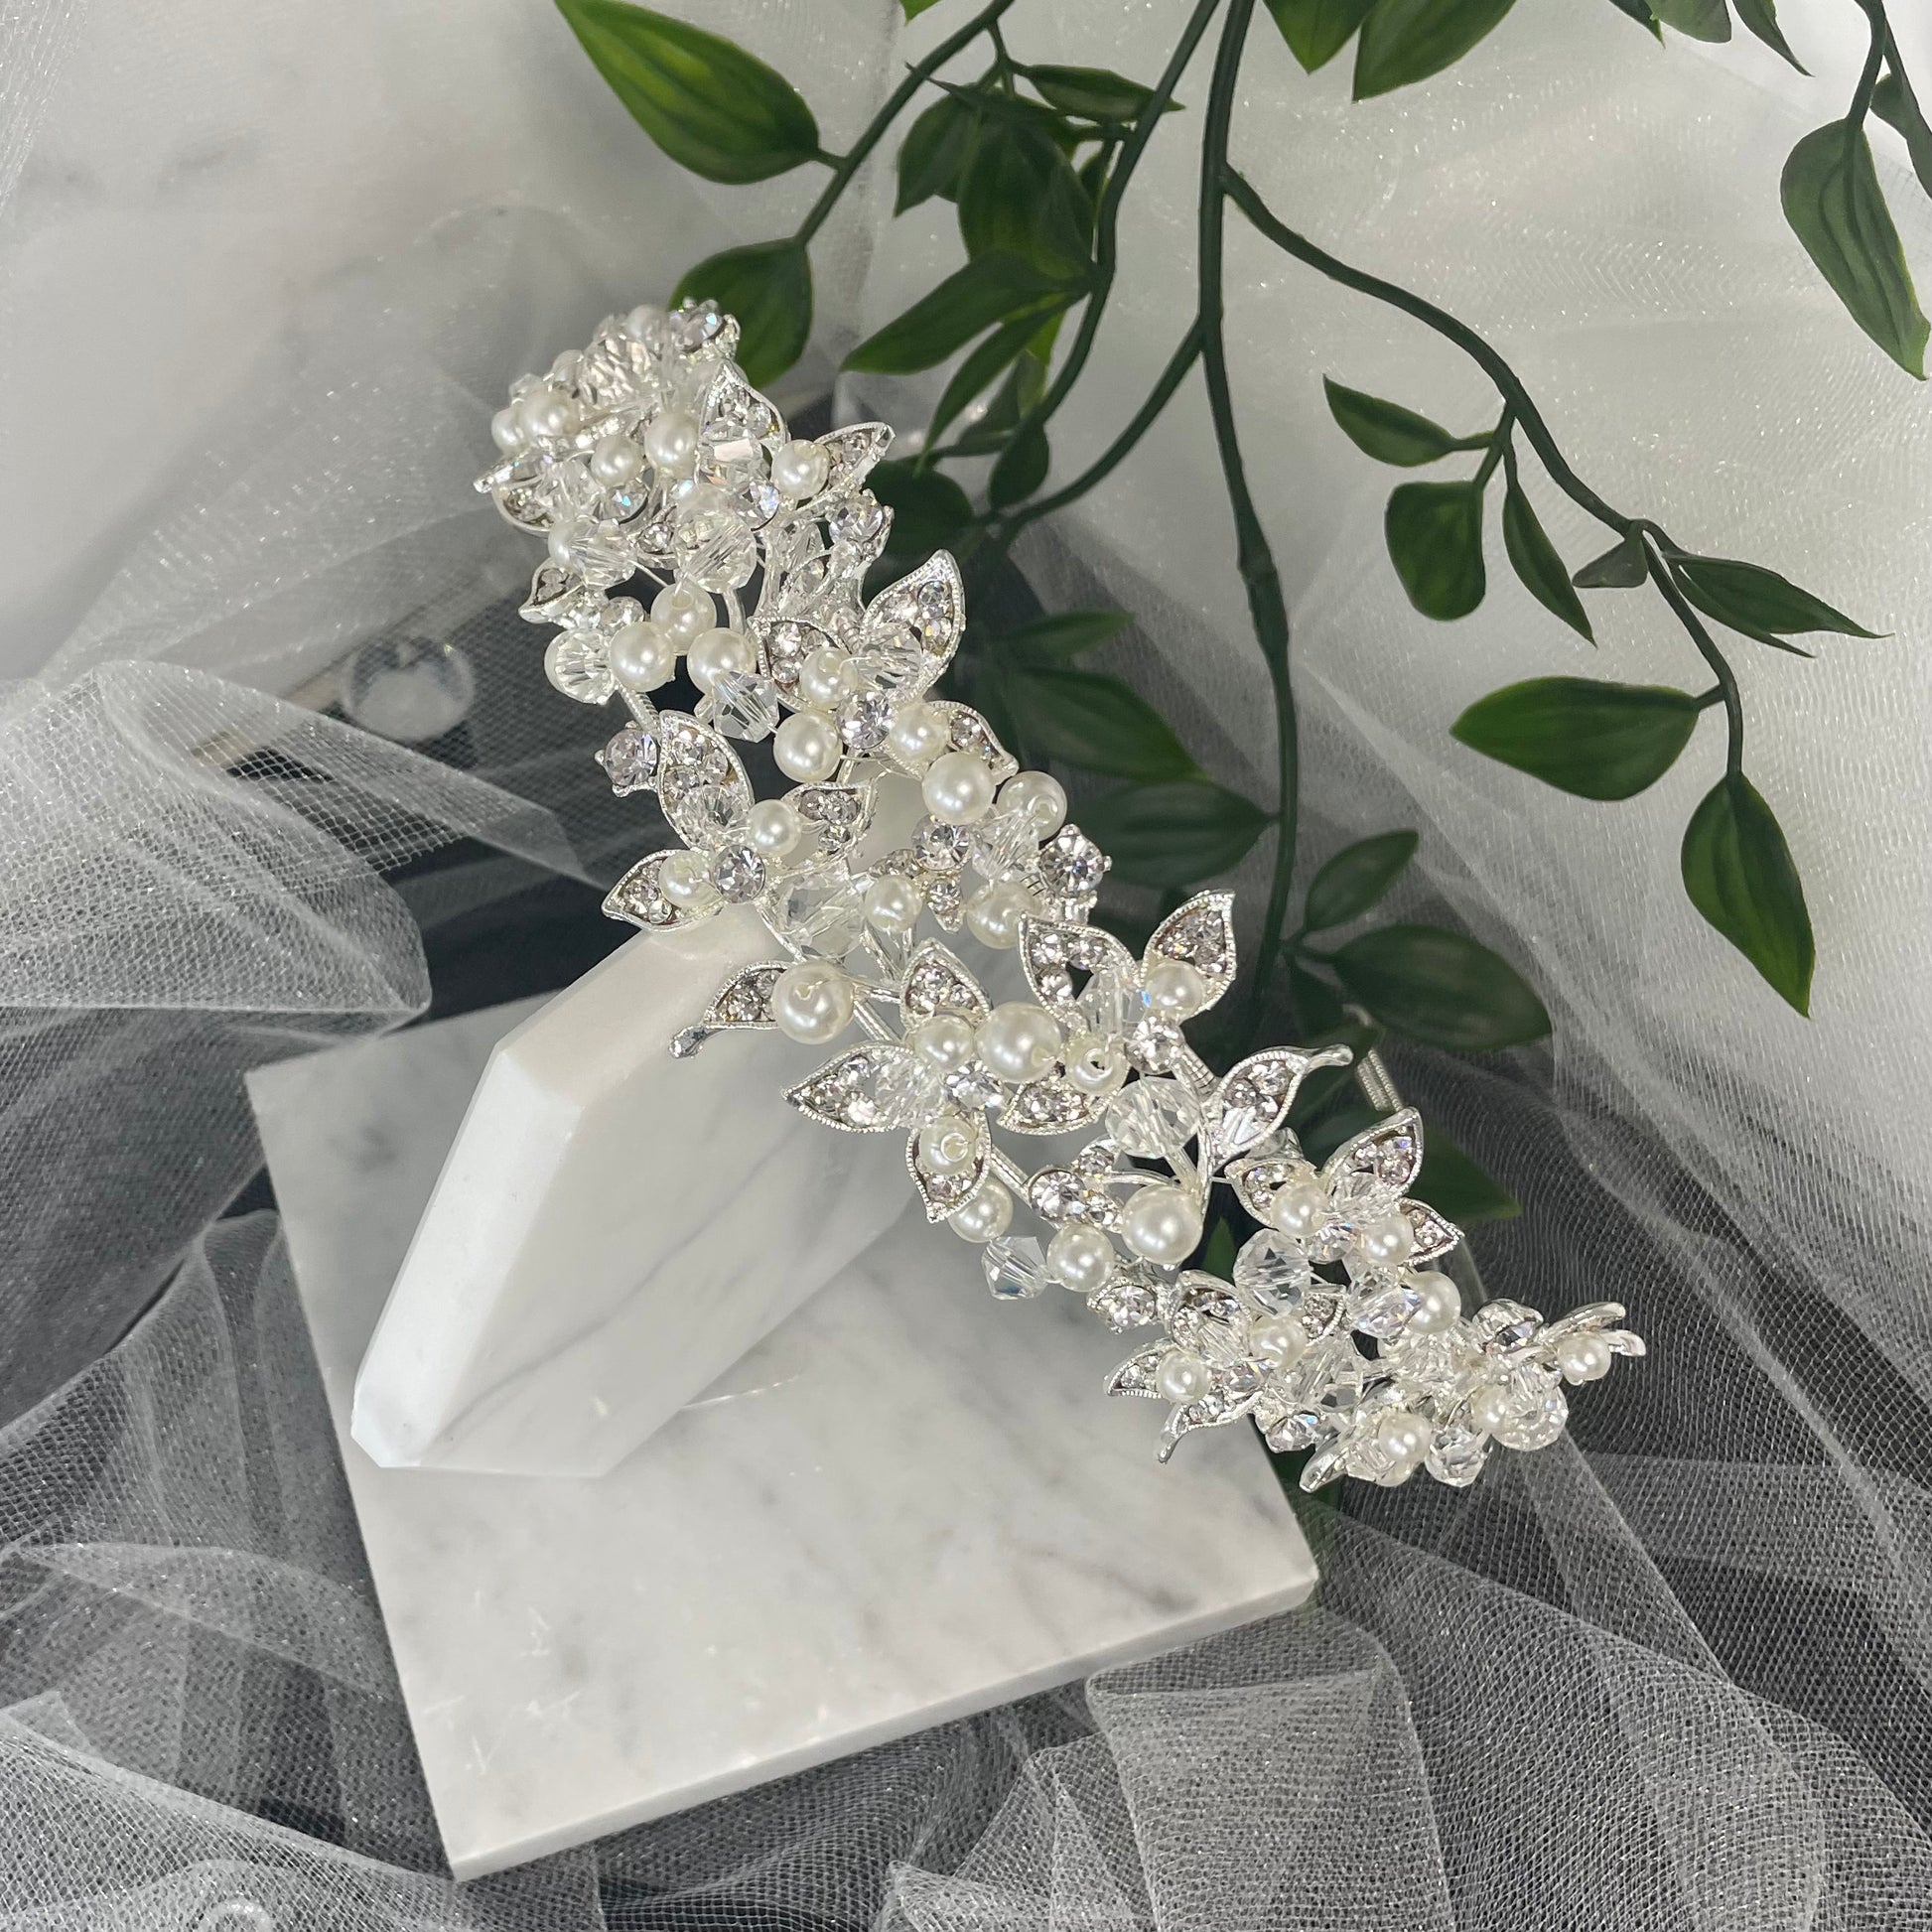 Exquisite Iris Bridal Headpiece with a floral design, adorned with pearls, crystals, and Diamontes, ideal for enhancing a sophisticated bridal hairstyle.